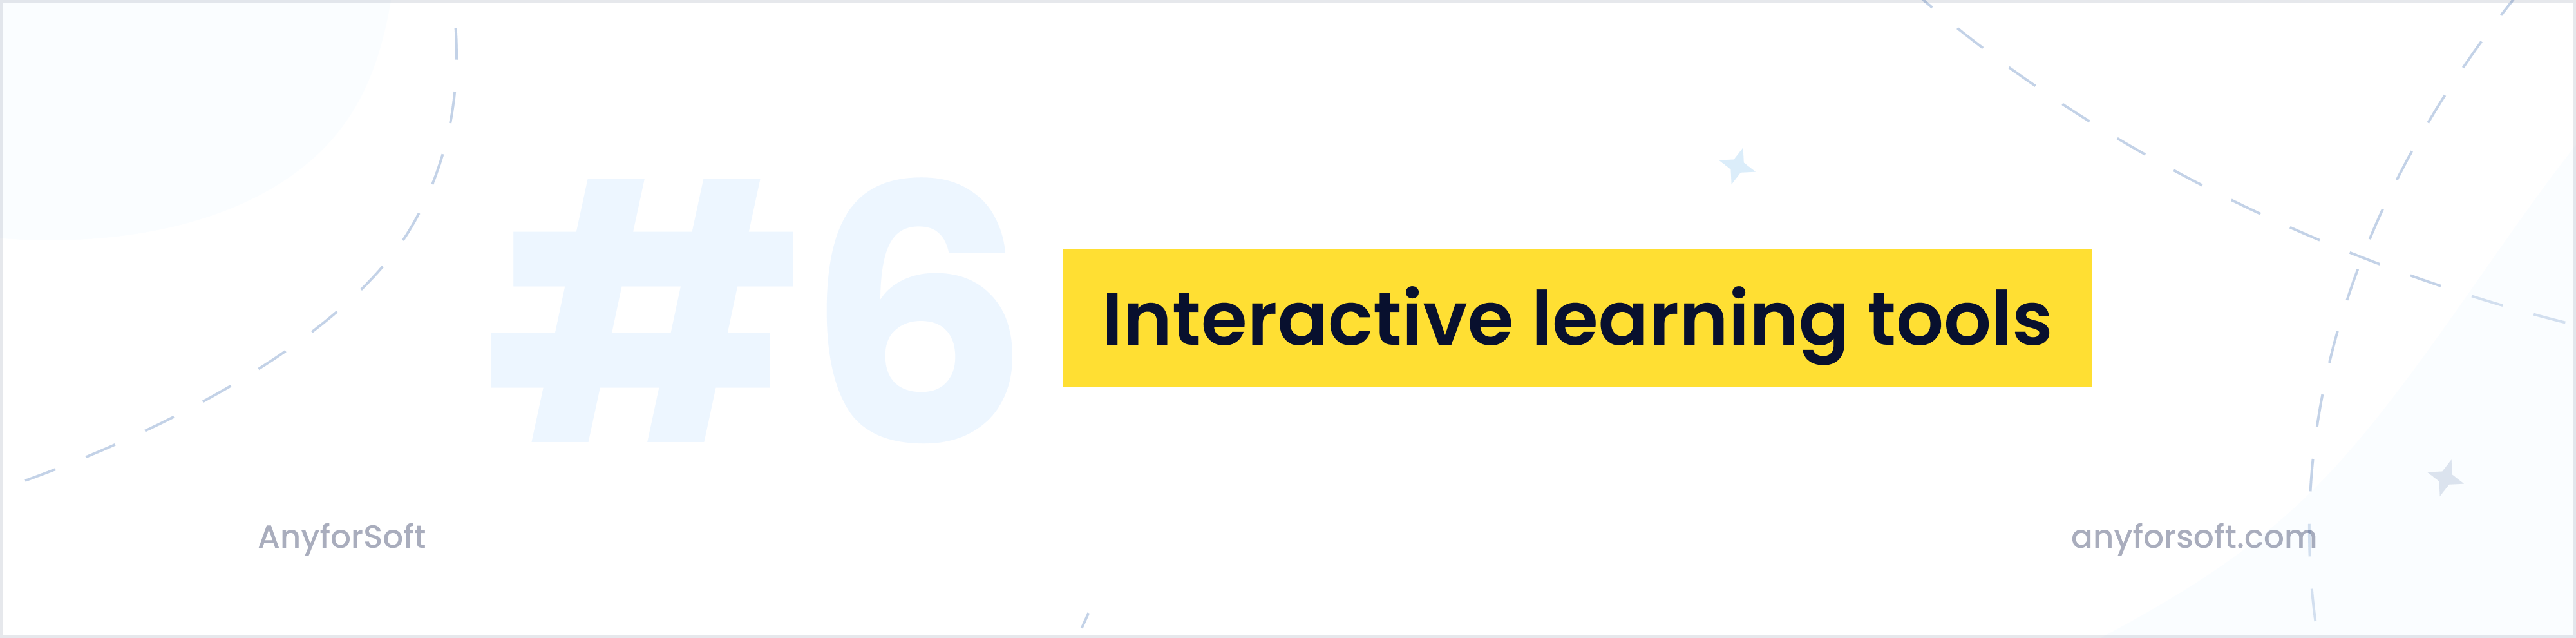 interactive learning tools